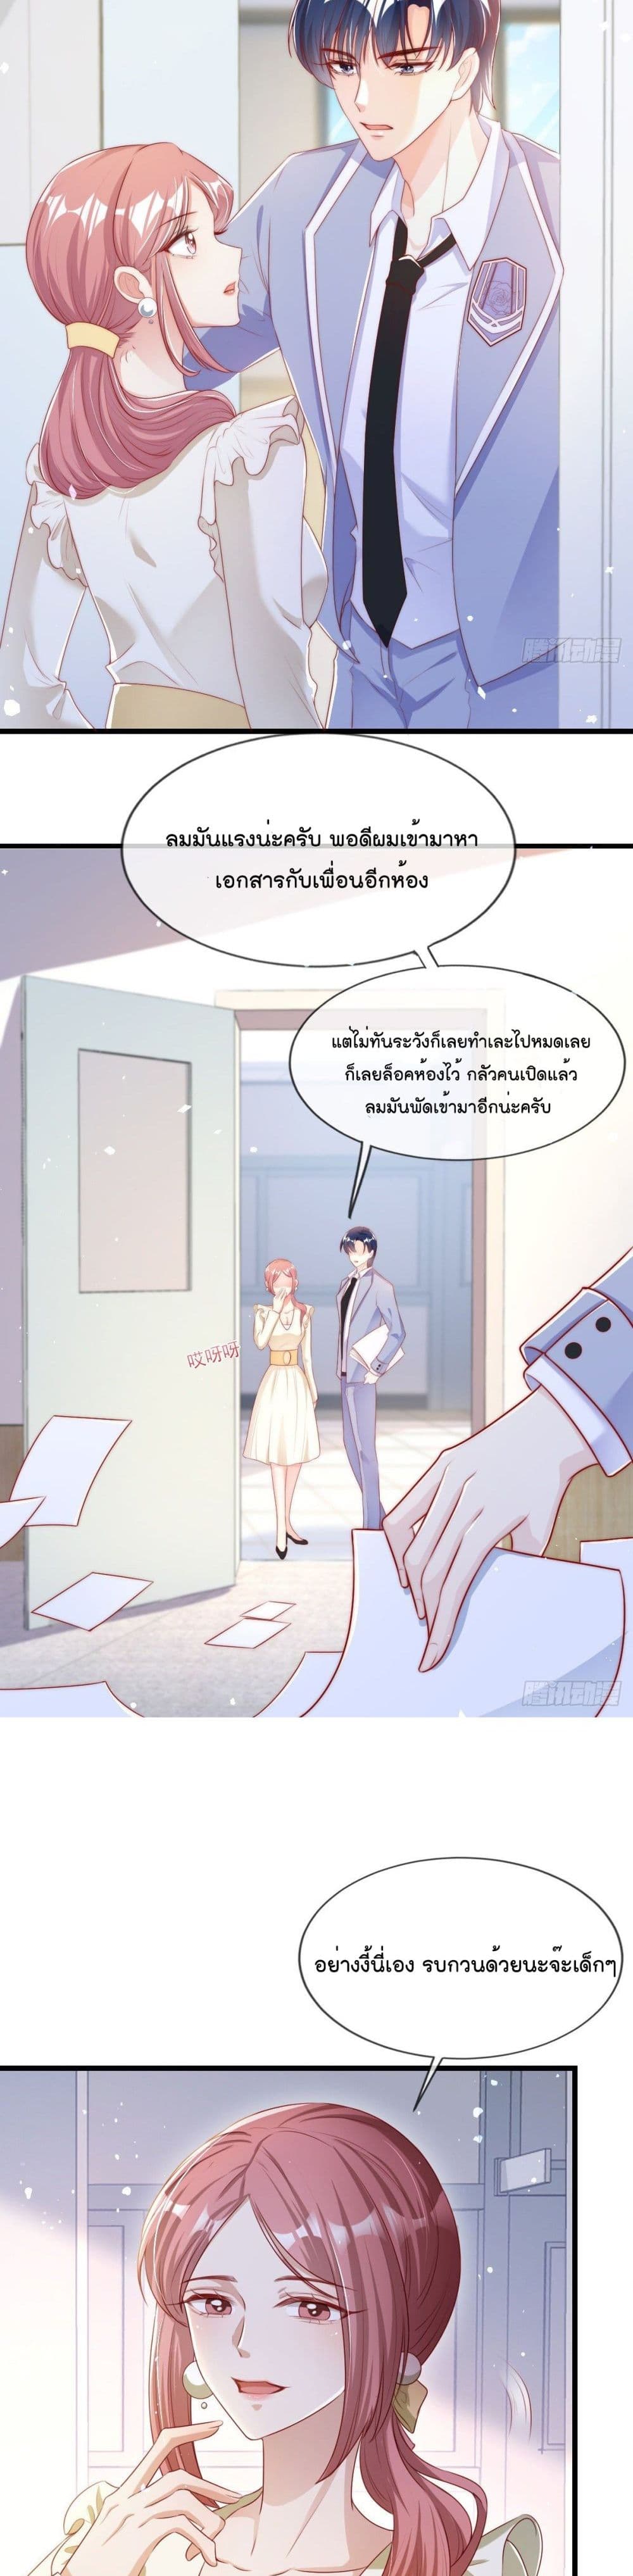 Find Me In Your Meory - หน้า 4